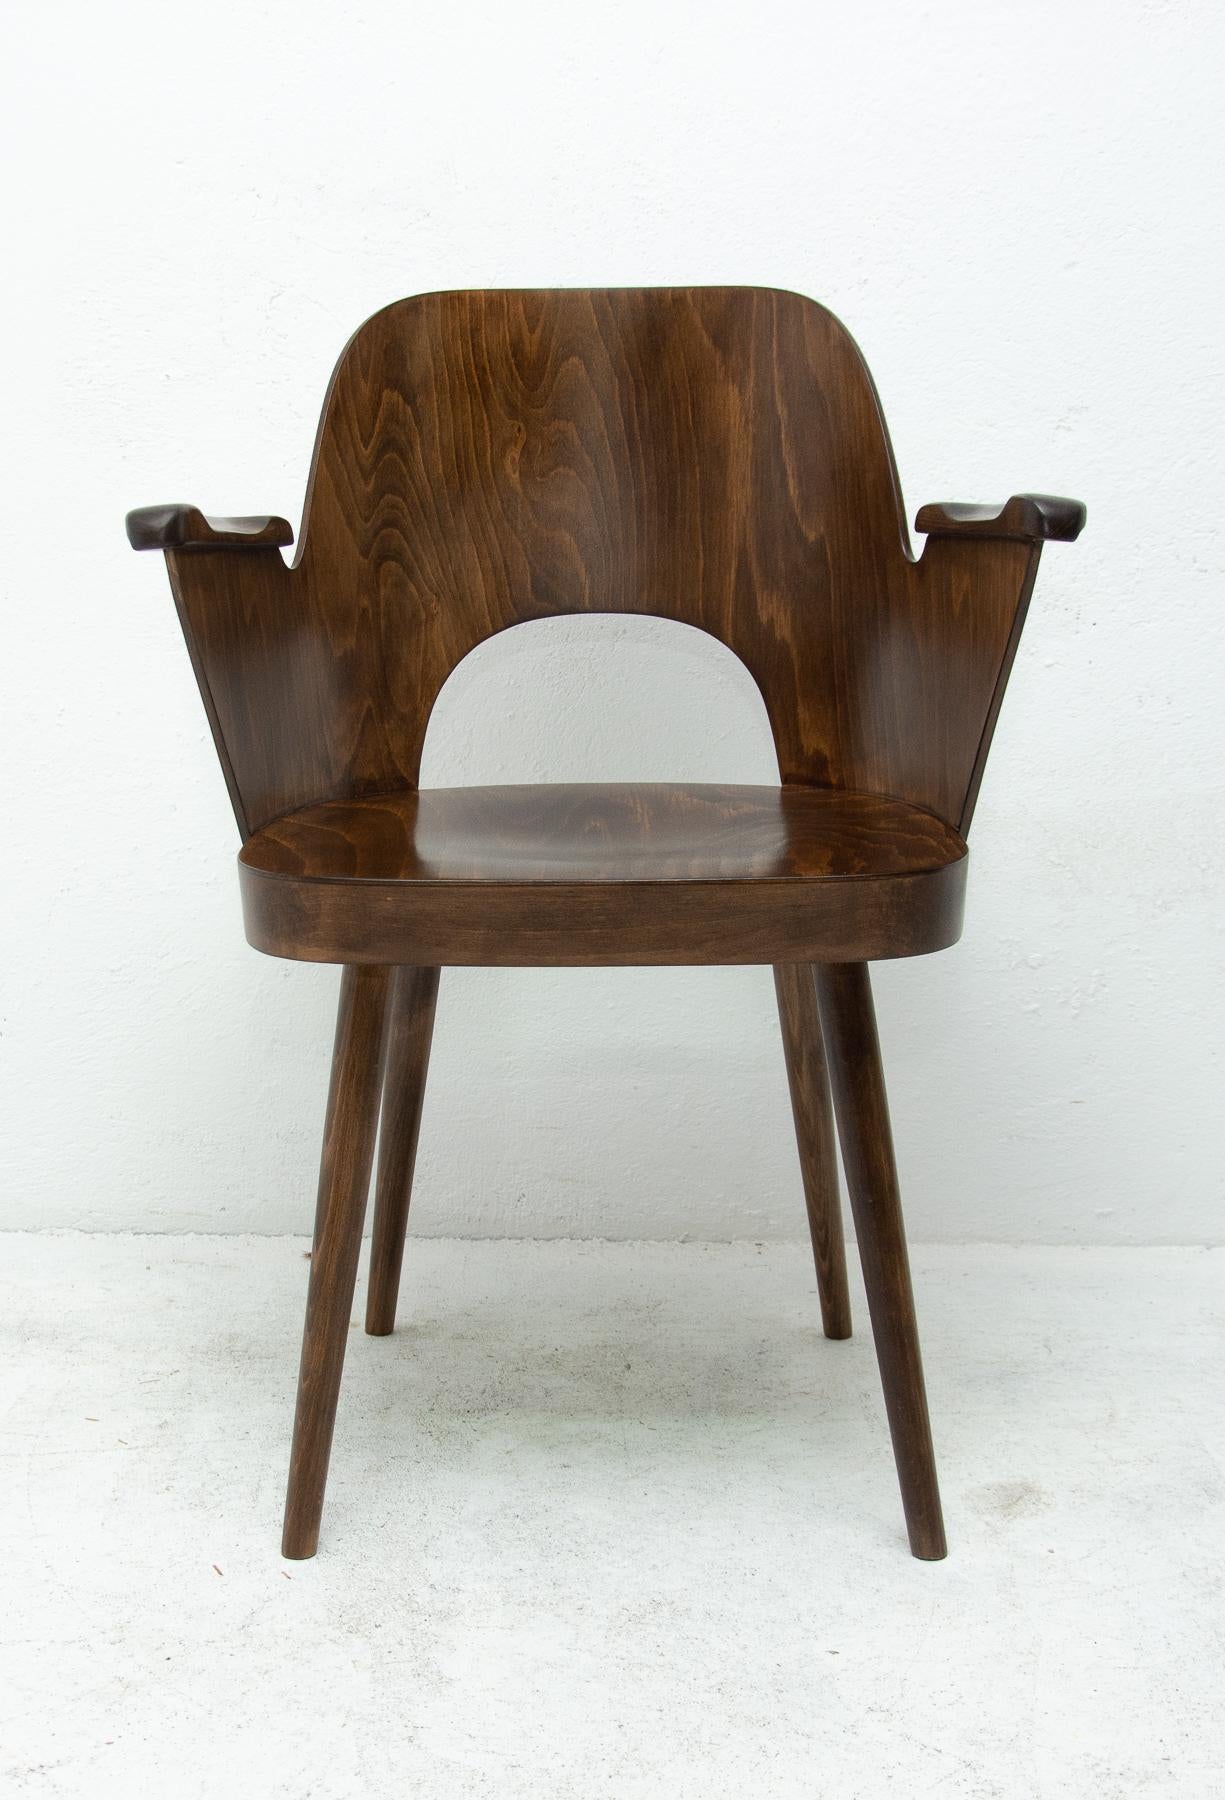 This armchair was designed by the Czechoslovak architect Radomír Hofman for TON Bystrice pod Hostýnem Company in the 1960´s.

The chairs are made from dark bent beechwood and plywood.

In very good vintage condition.